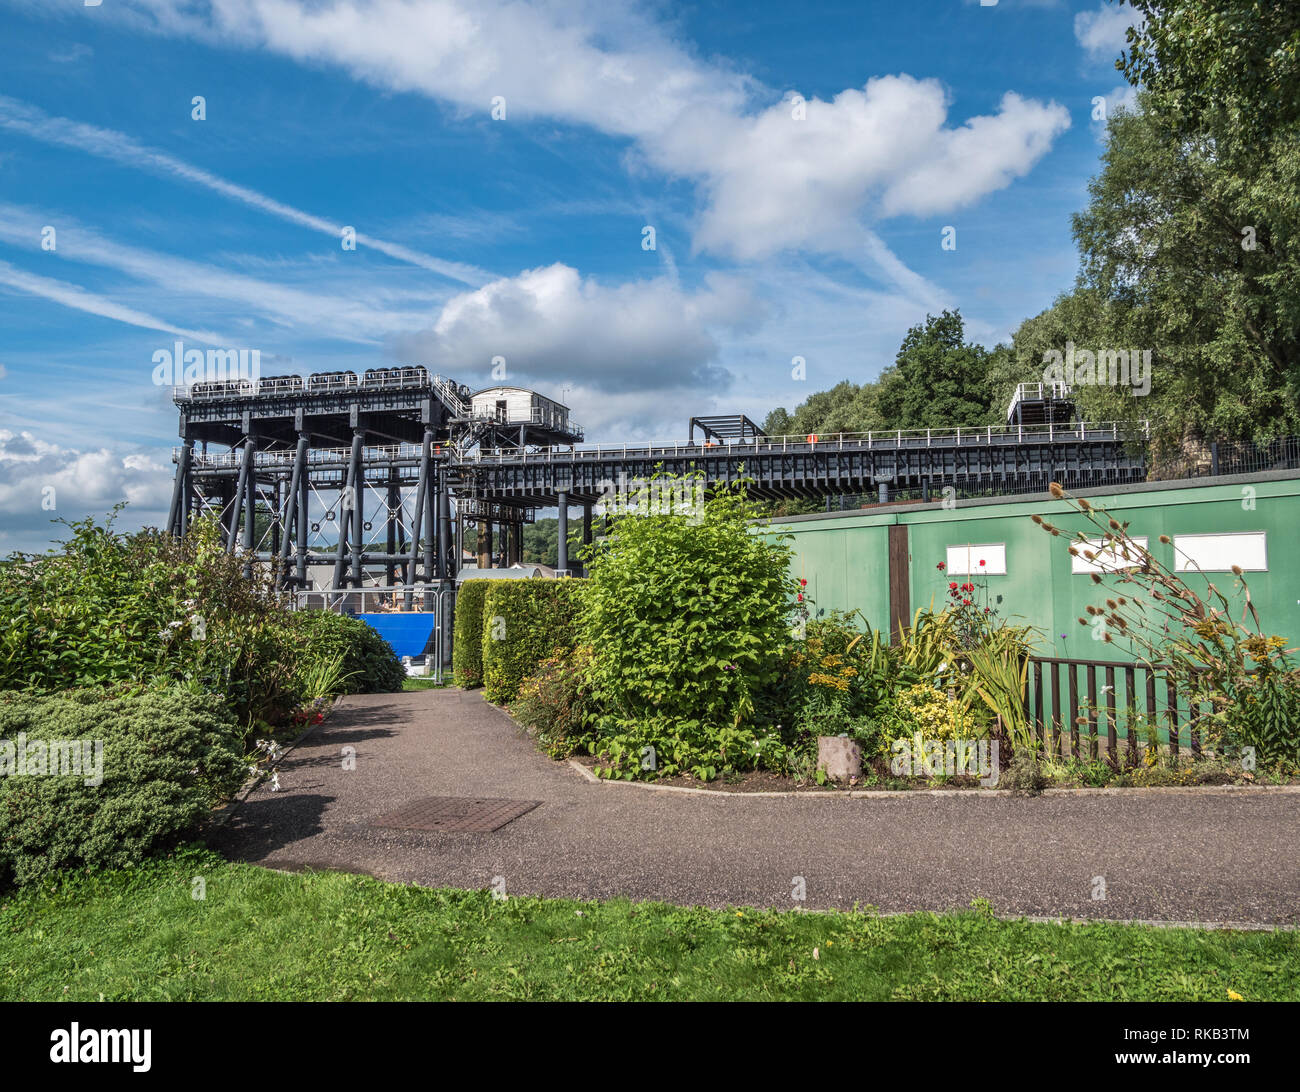 Anderton Boat Lift is a 2 caisson lift lock. Providing a 50-foot vertical link between 2 navigable waterways; River Weaver and Trent and Mersey Canal. Stock Photo